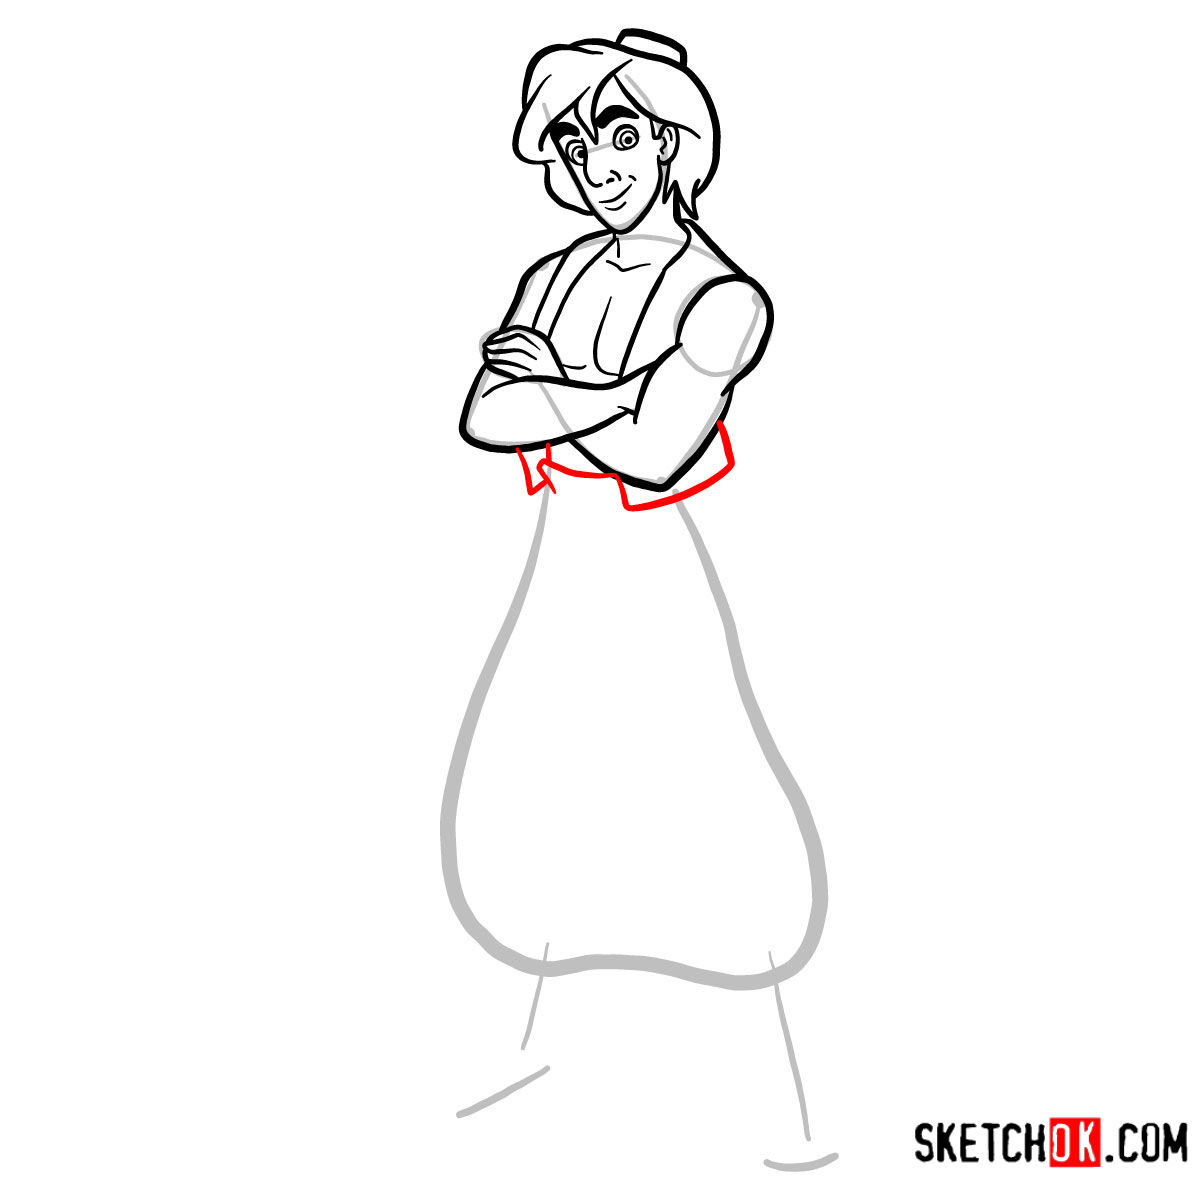 How to draw Aladdin from Disney's animated series - step 08